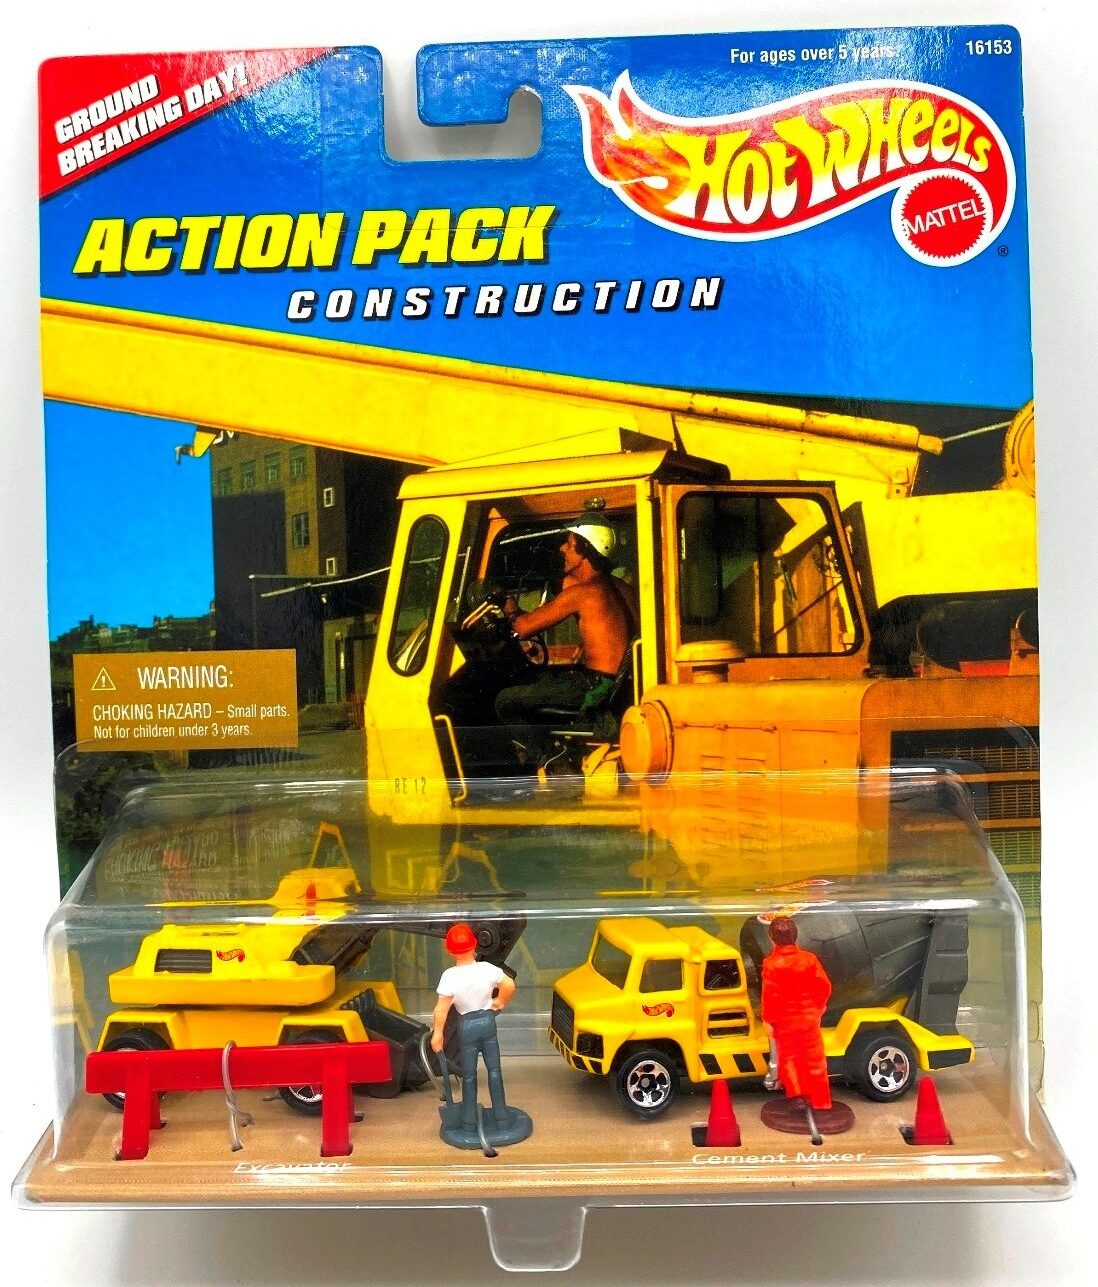 Action Pack (Construction) “Ground Breaking Day!” (HotwheelsMultiple